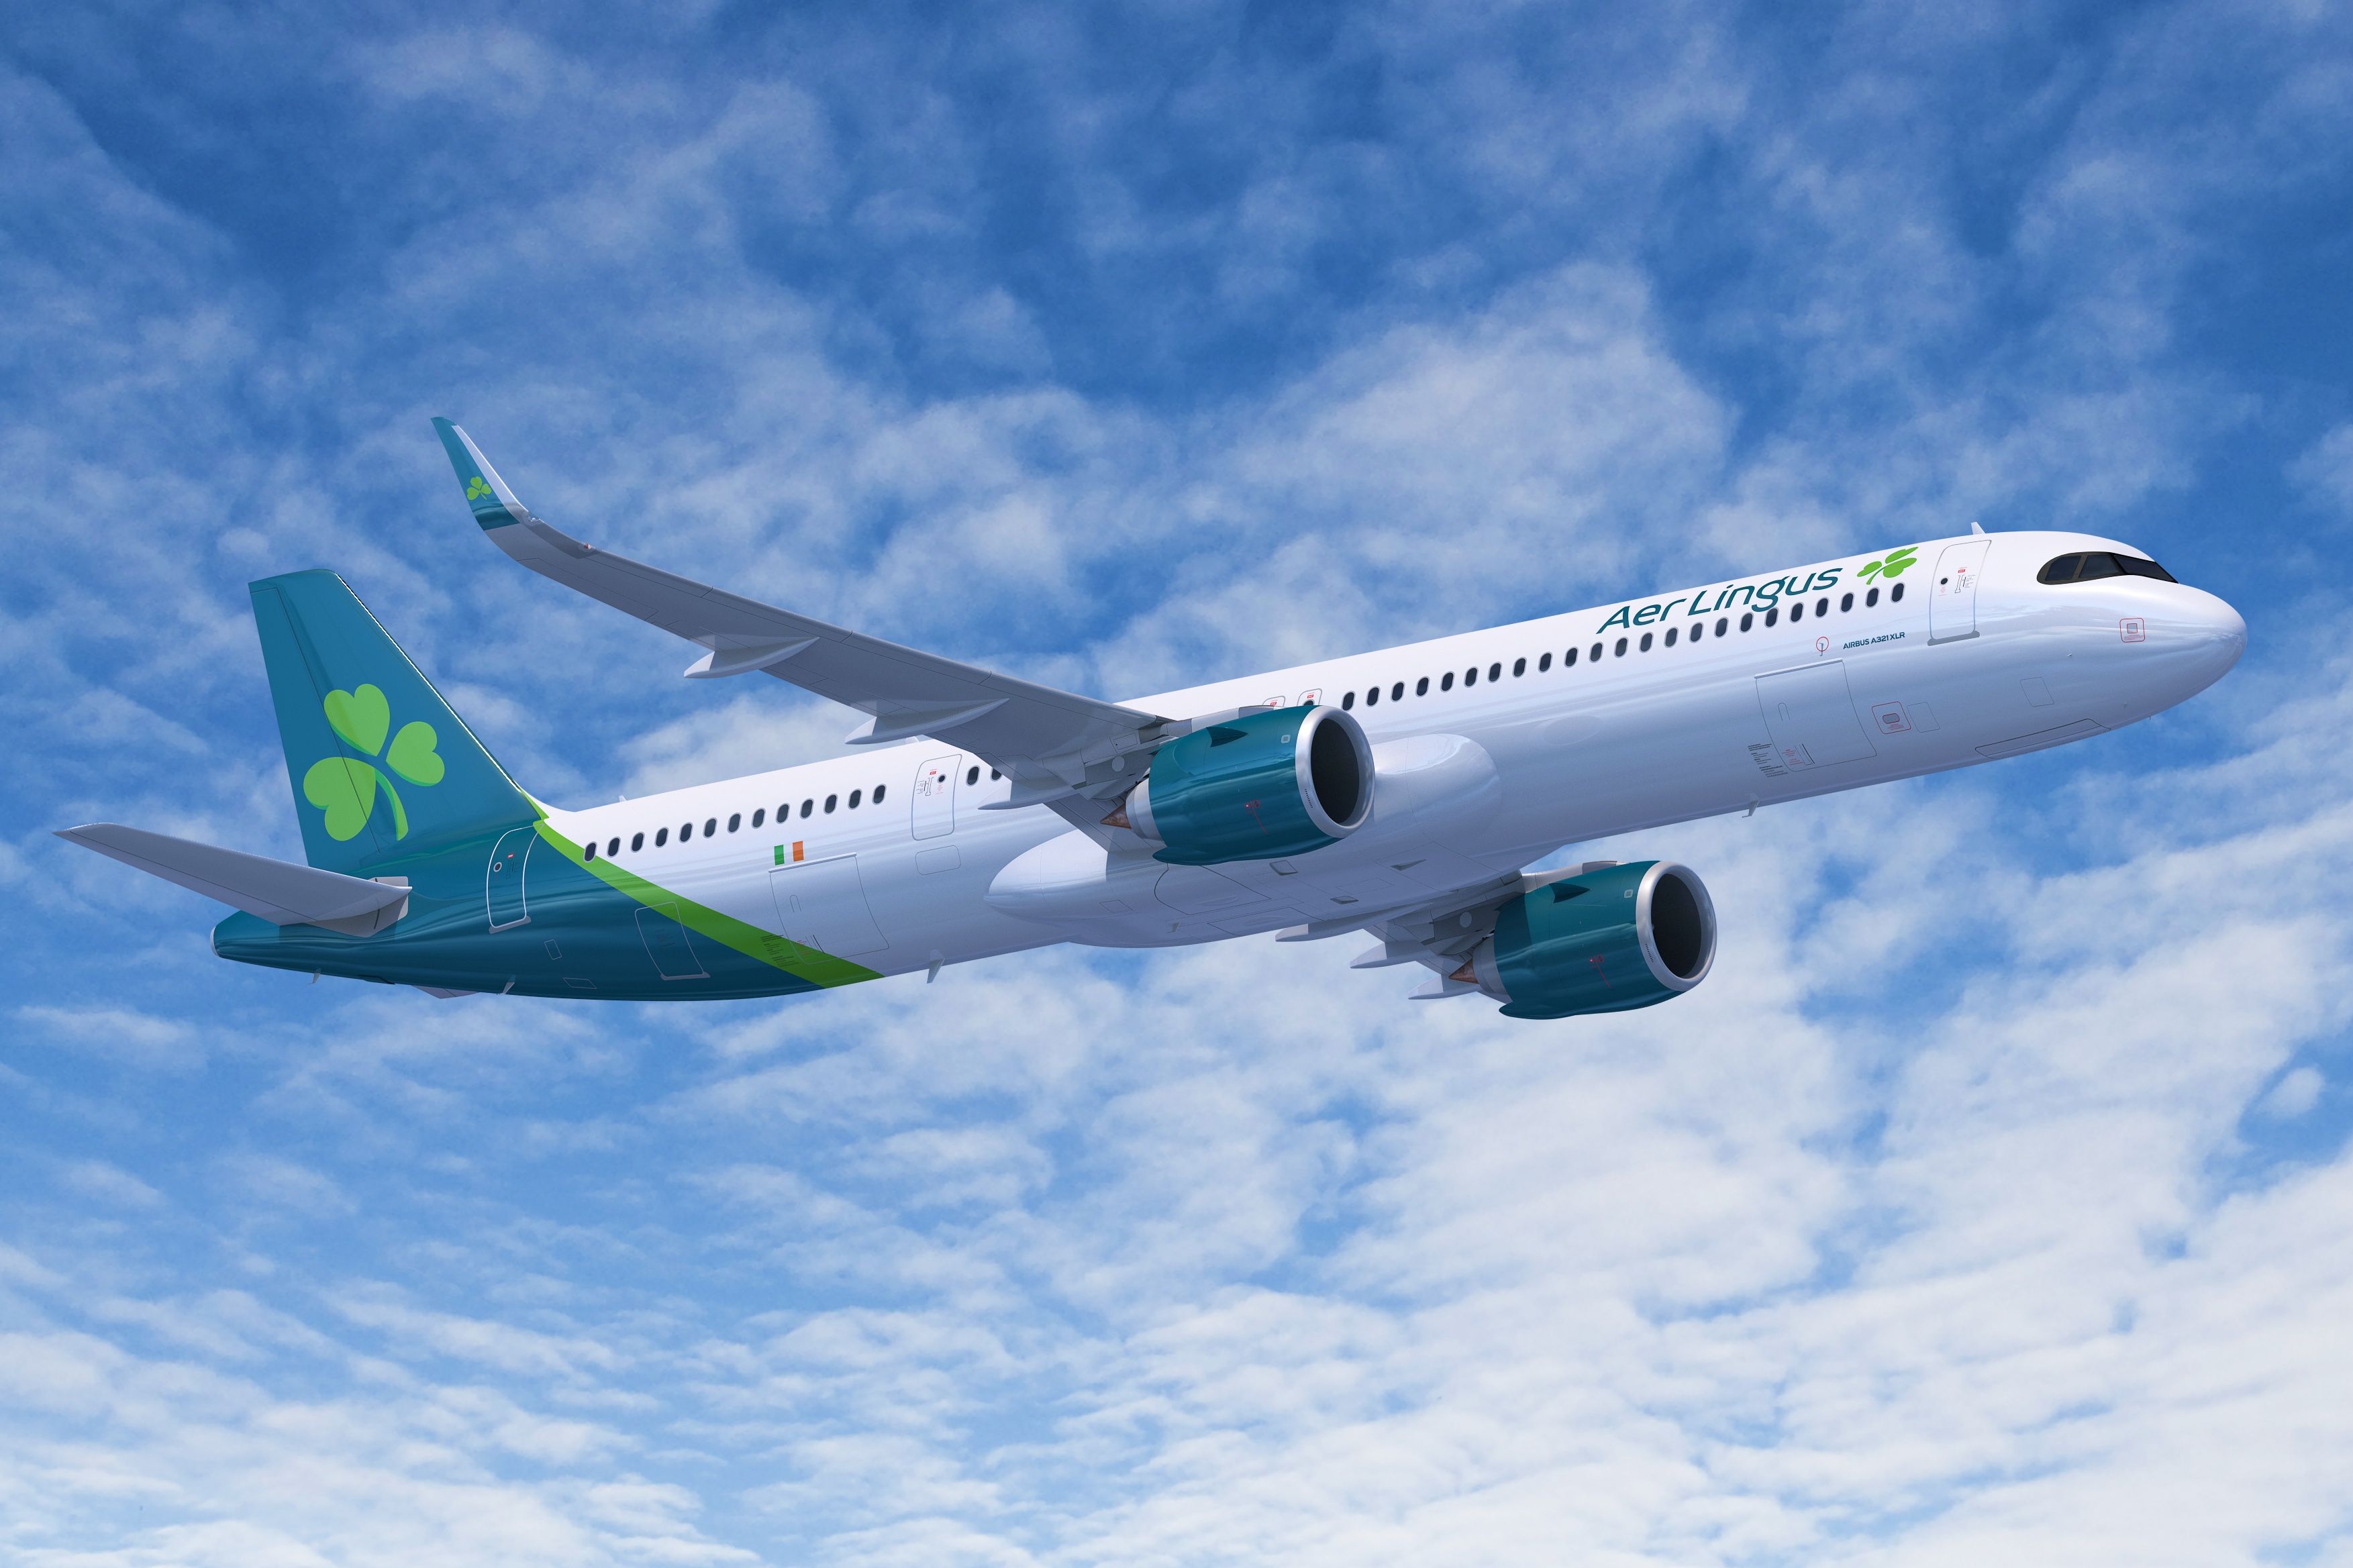 Rendering of an Aer Lingus Airbus A321XLR provided by Airbus.